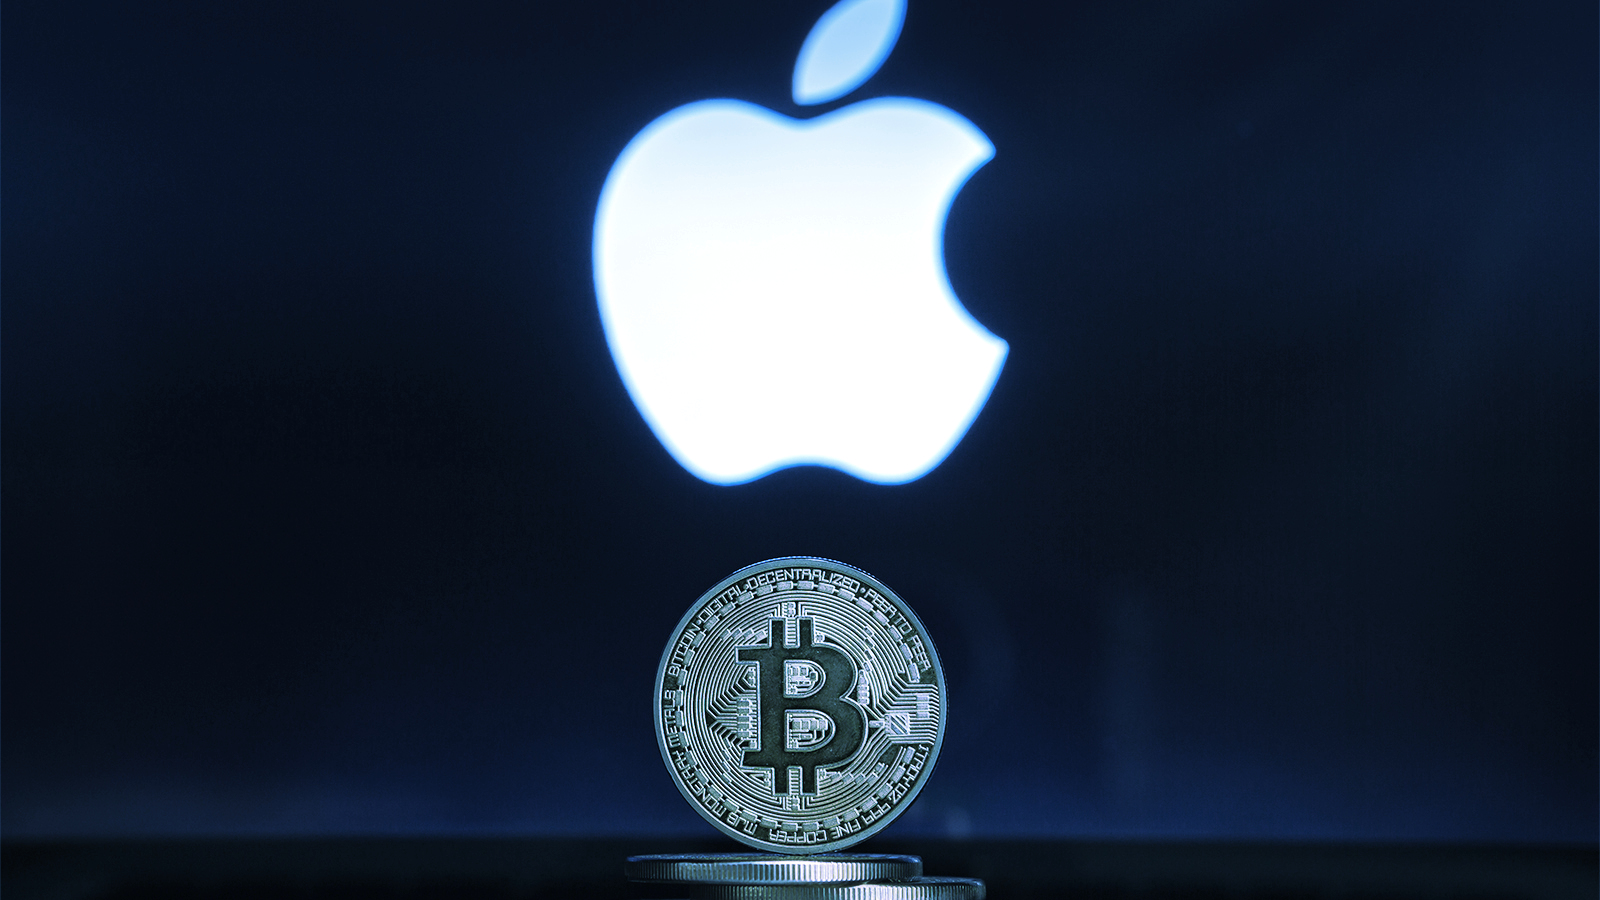 Thousands Tune in to Fake Apple Crypto Scheme on YouTube: Report